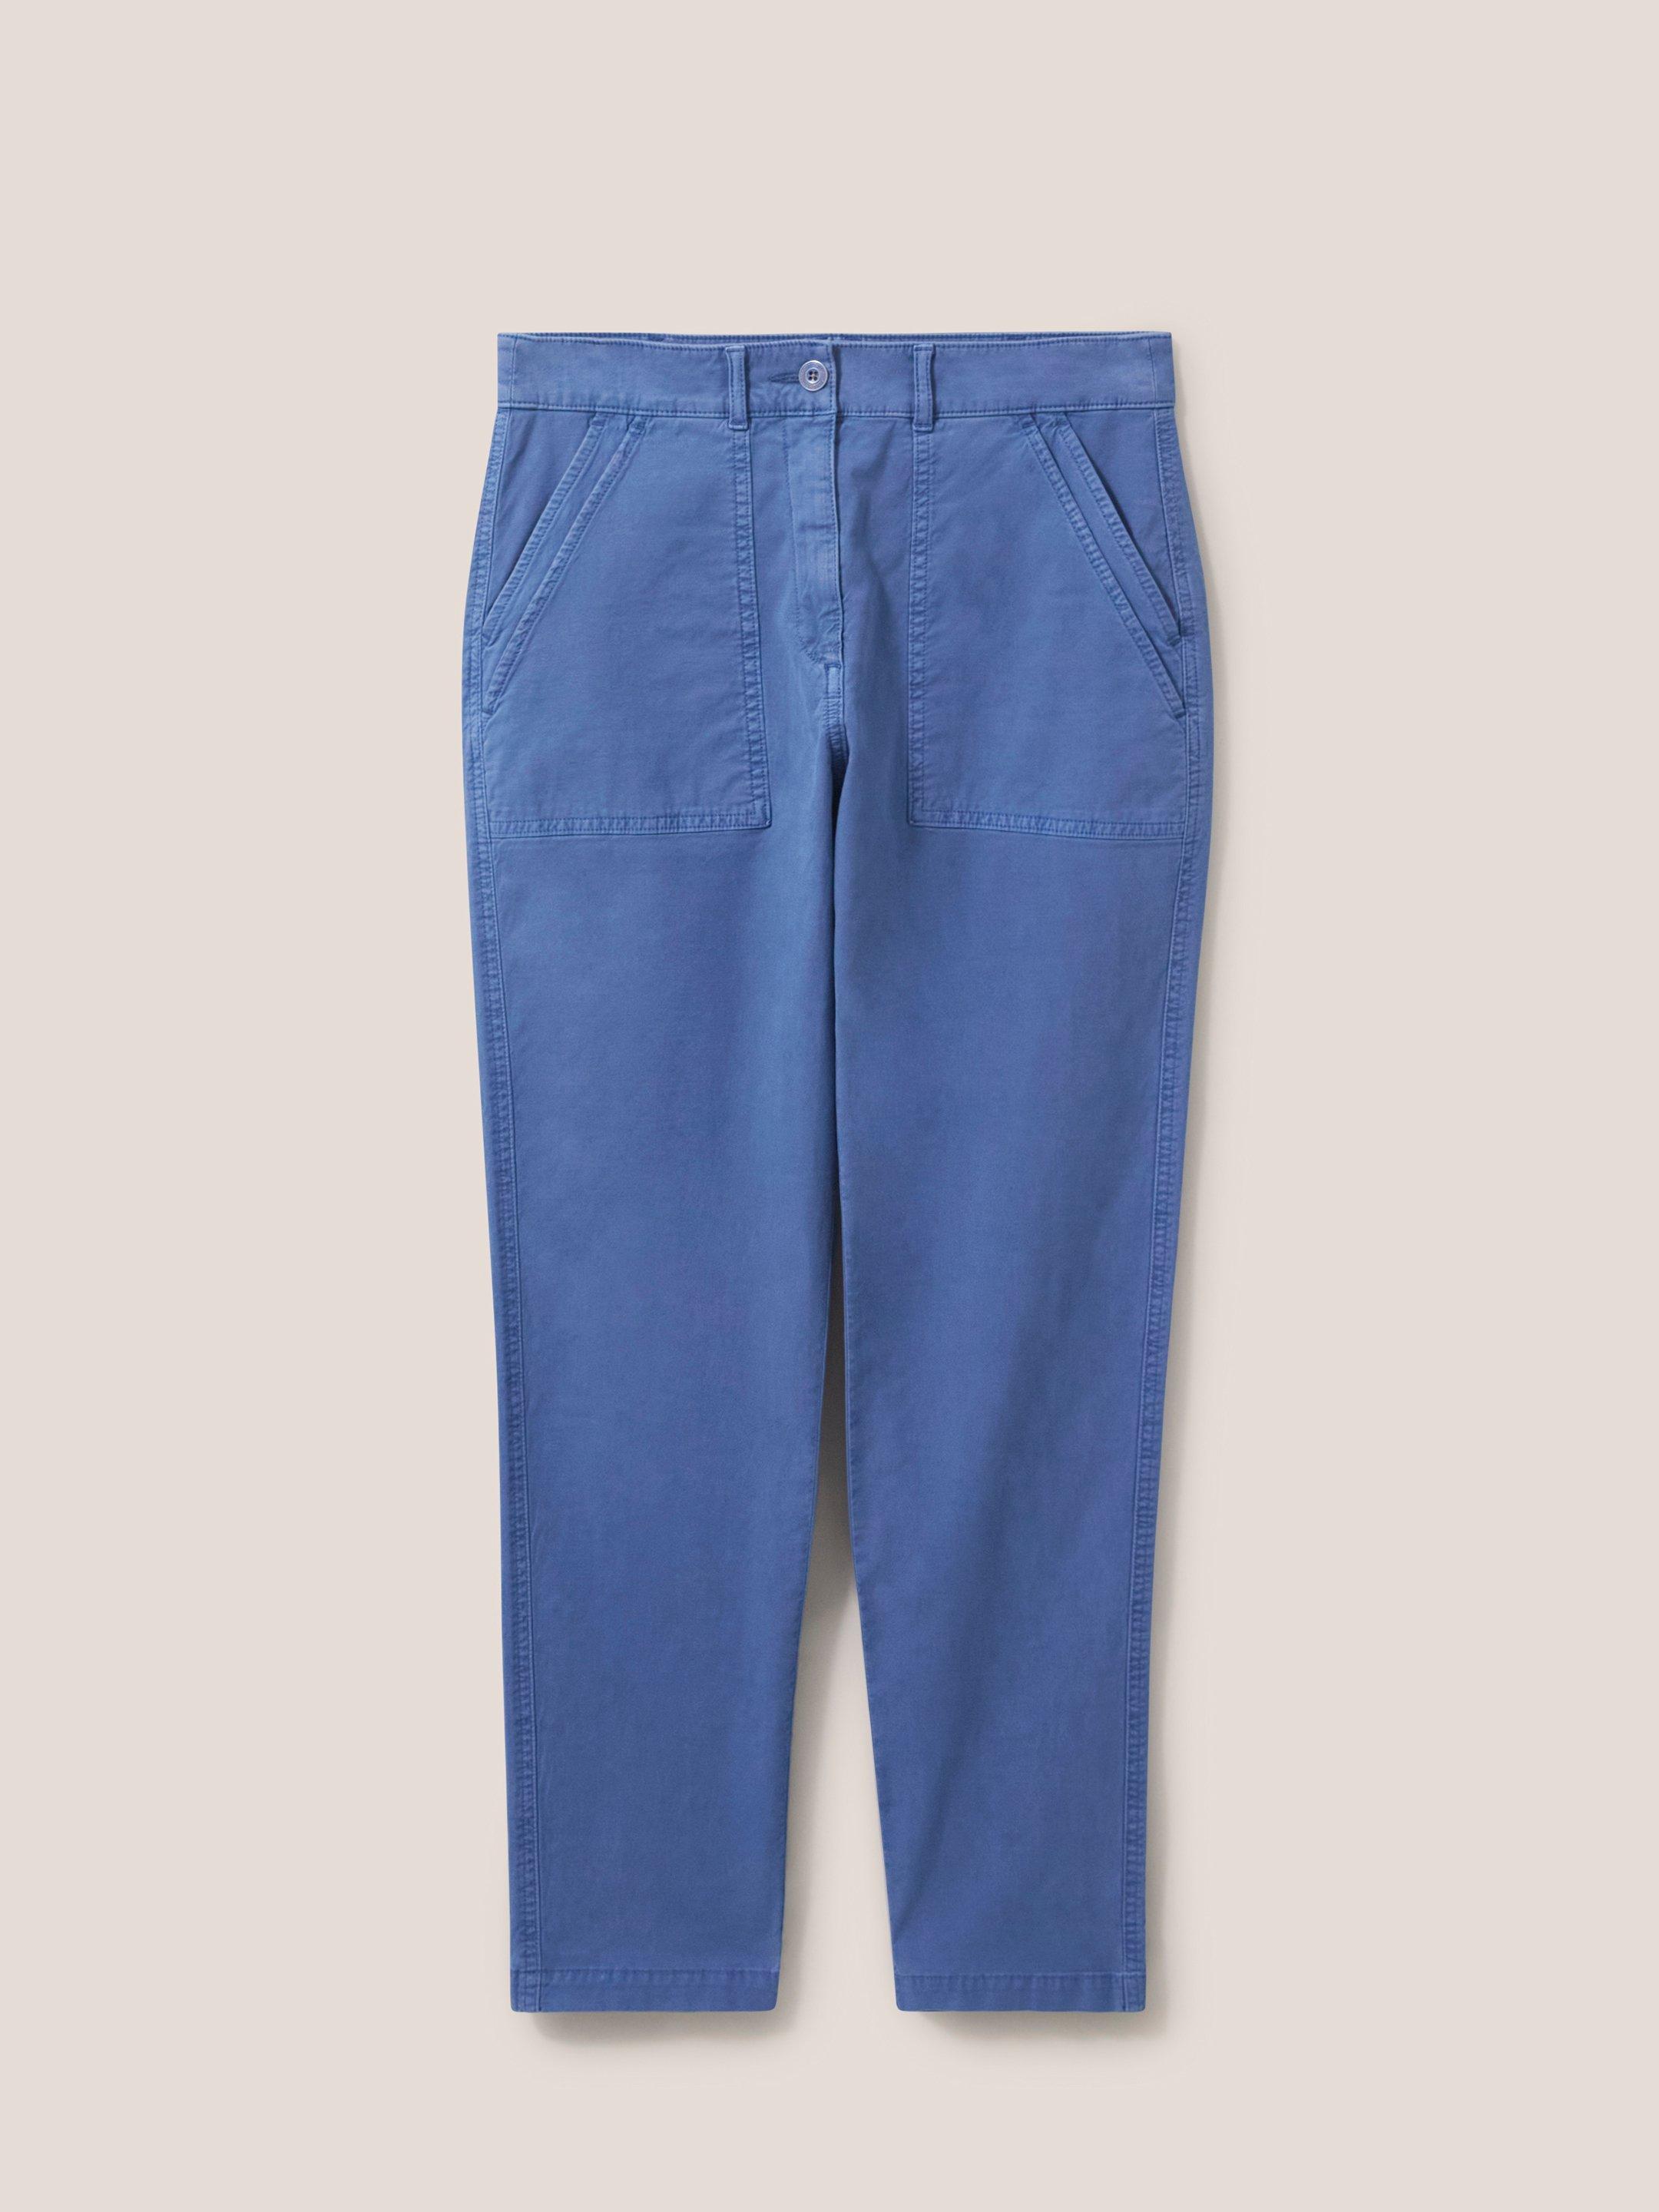 Twister Chino in MID BLUE - FLAT FRONT